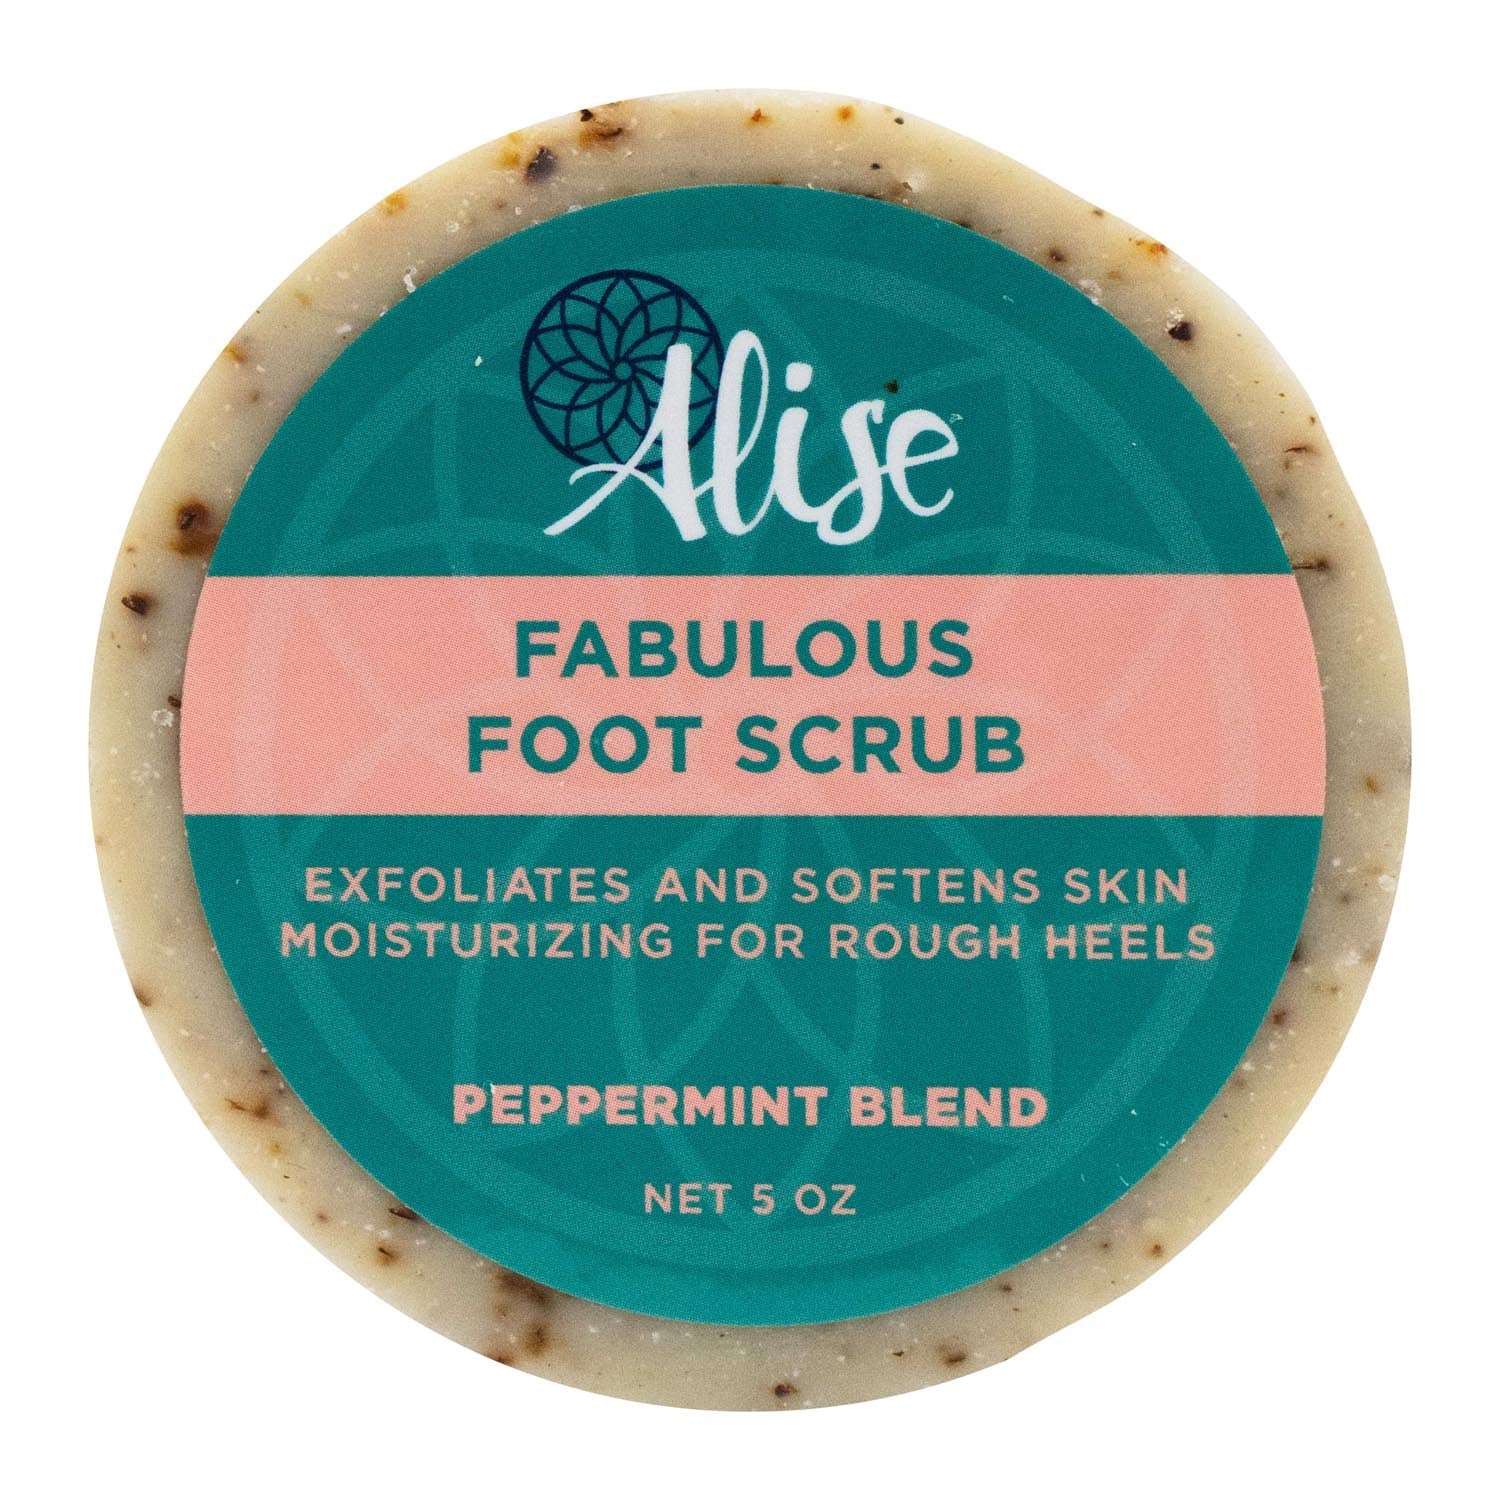 Fabulous Foot Scrub Soap 5oz handcrafted by Alise Body Care